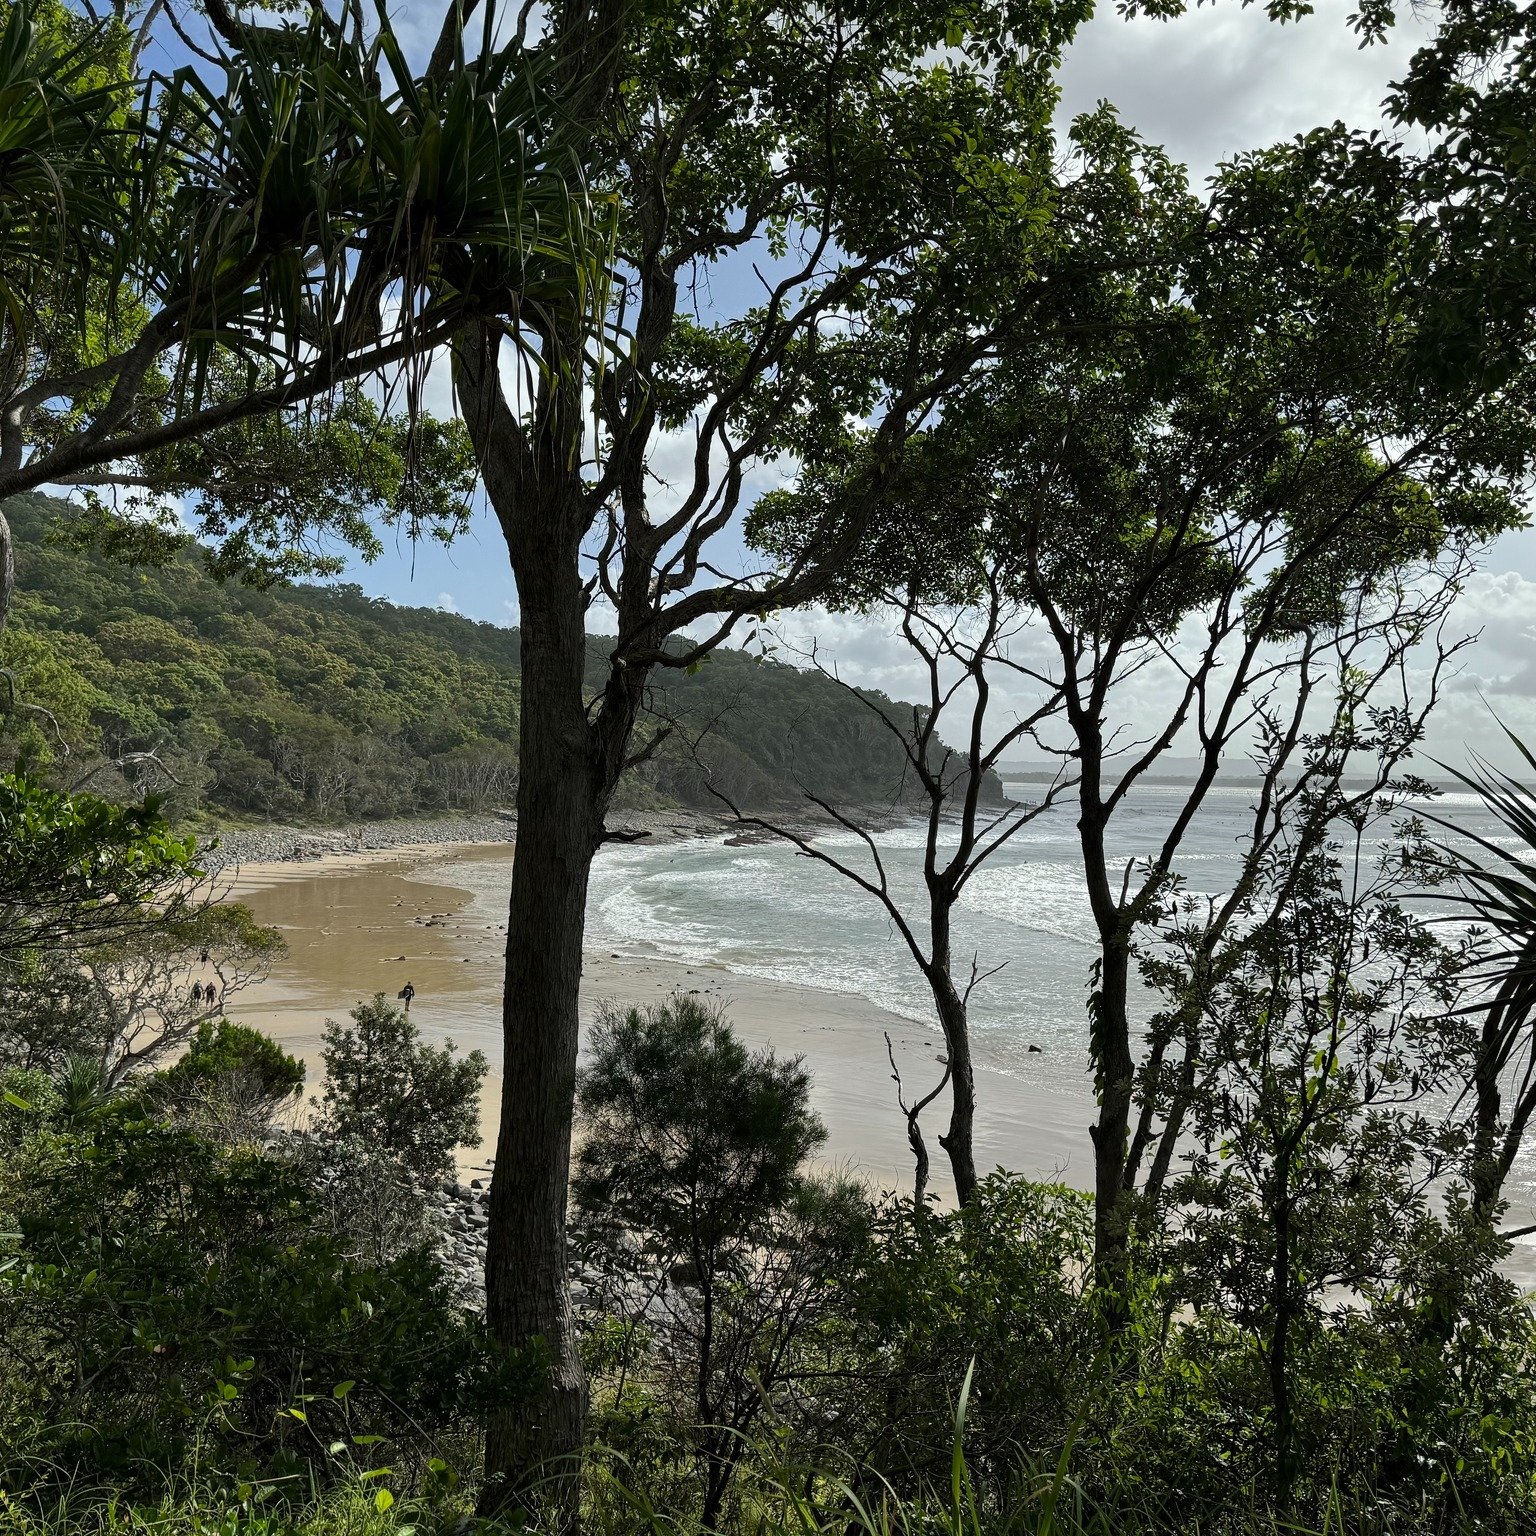 Every year I have the good fortune of spending a week in Noosa and one of my favourite things to do is the Hell&rsquo;s Gate walk through the National Park every day. The views are spectacular and it&rsquo;s just under 6km round trip - so grounding!
